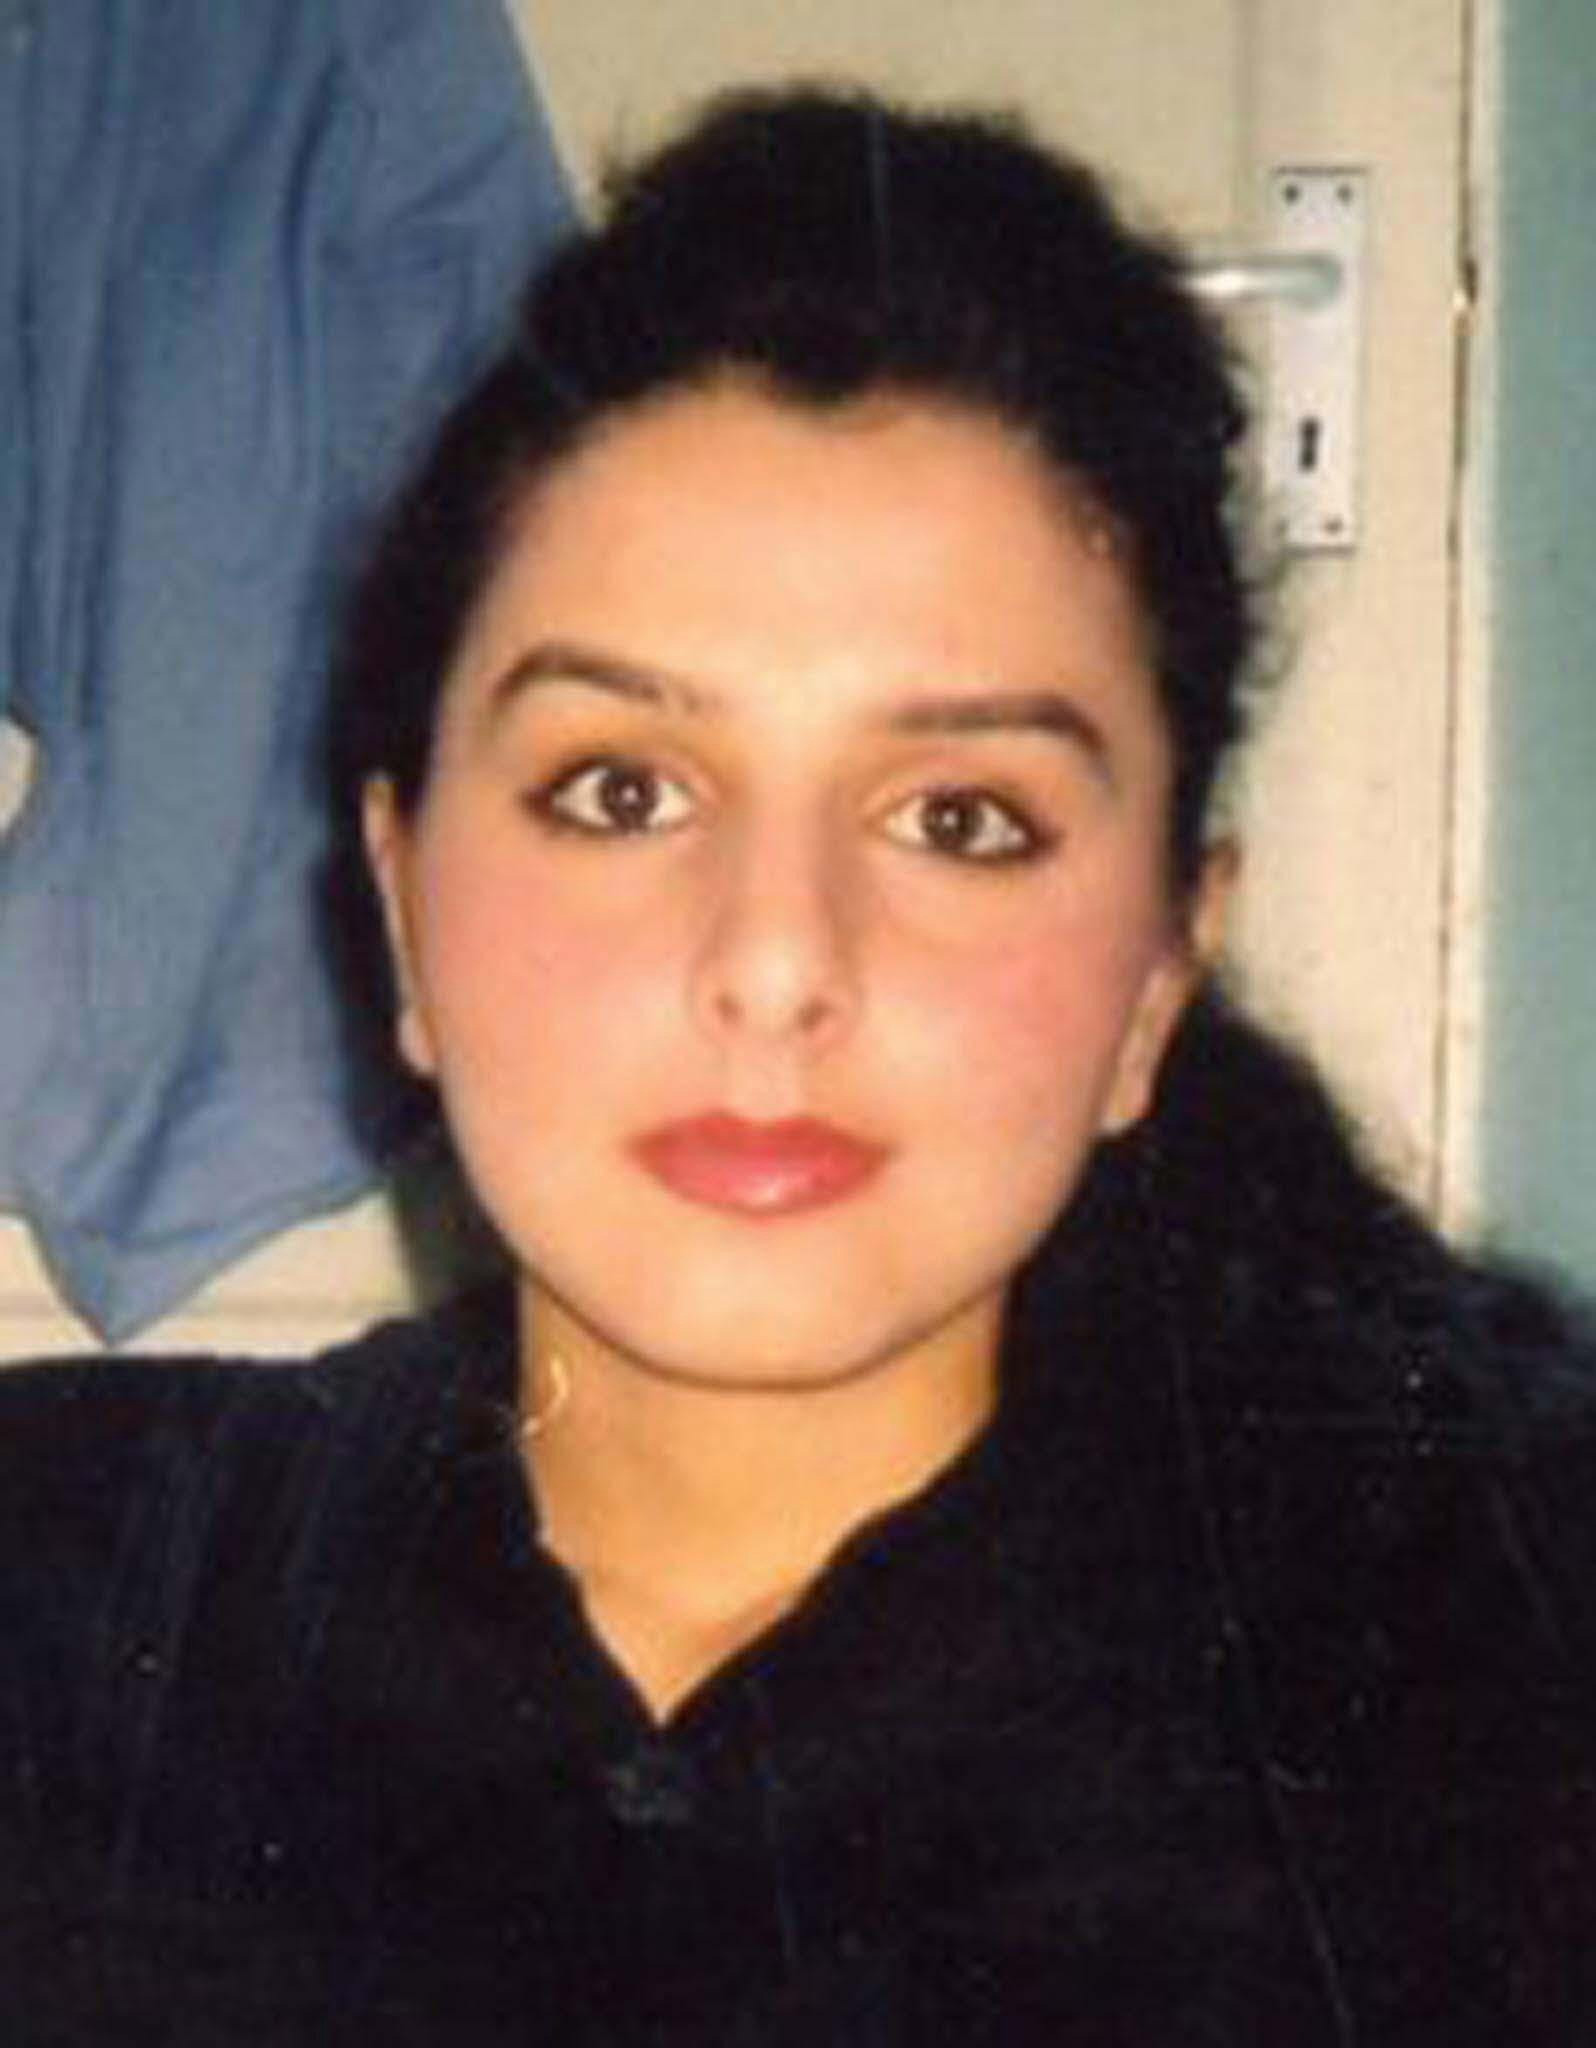 Banaz Mahmod was raped, tortured and murdered by a man hired by her father and uncle because she ended an abusive forced marriage and had met a new partner